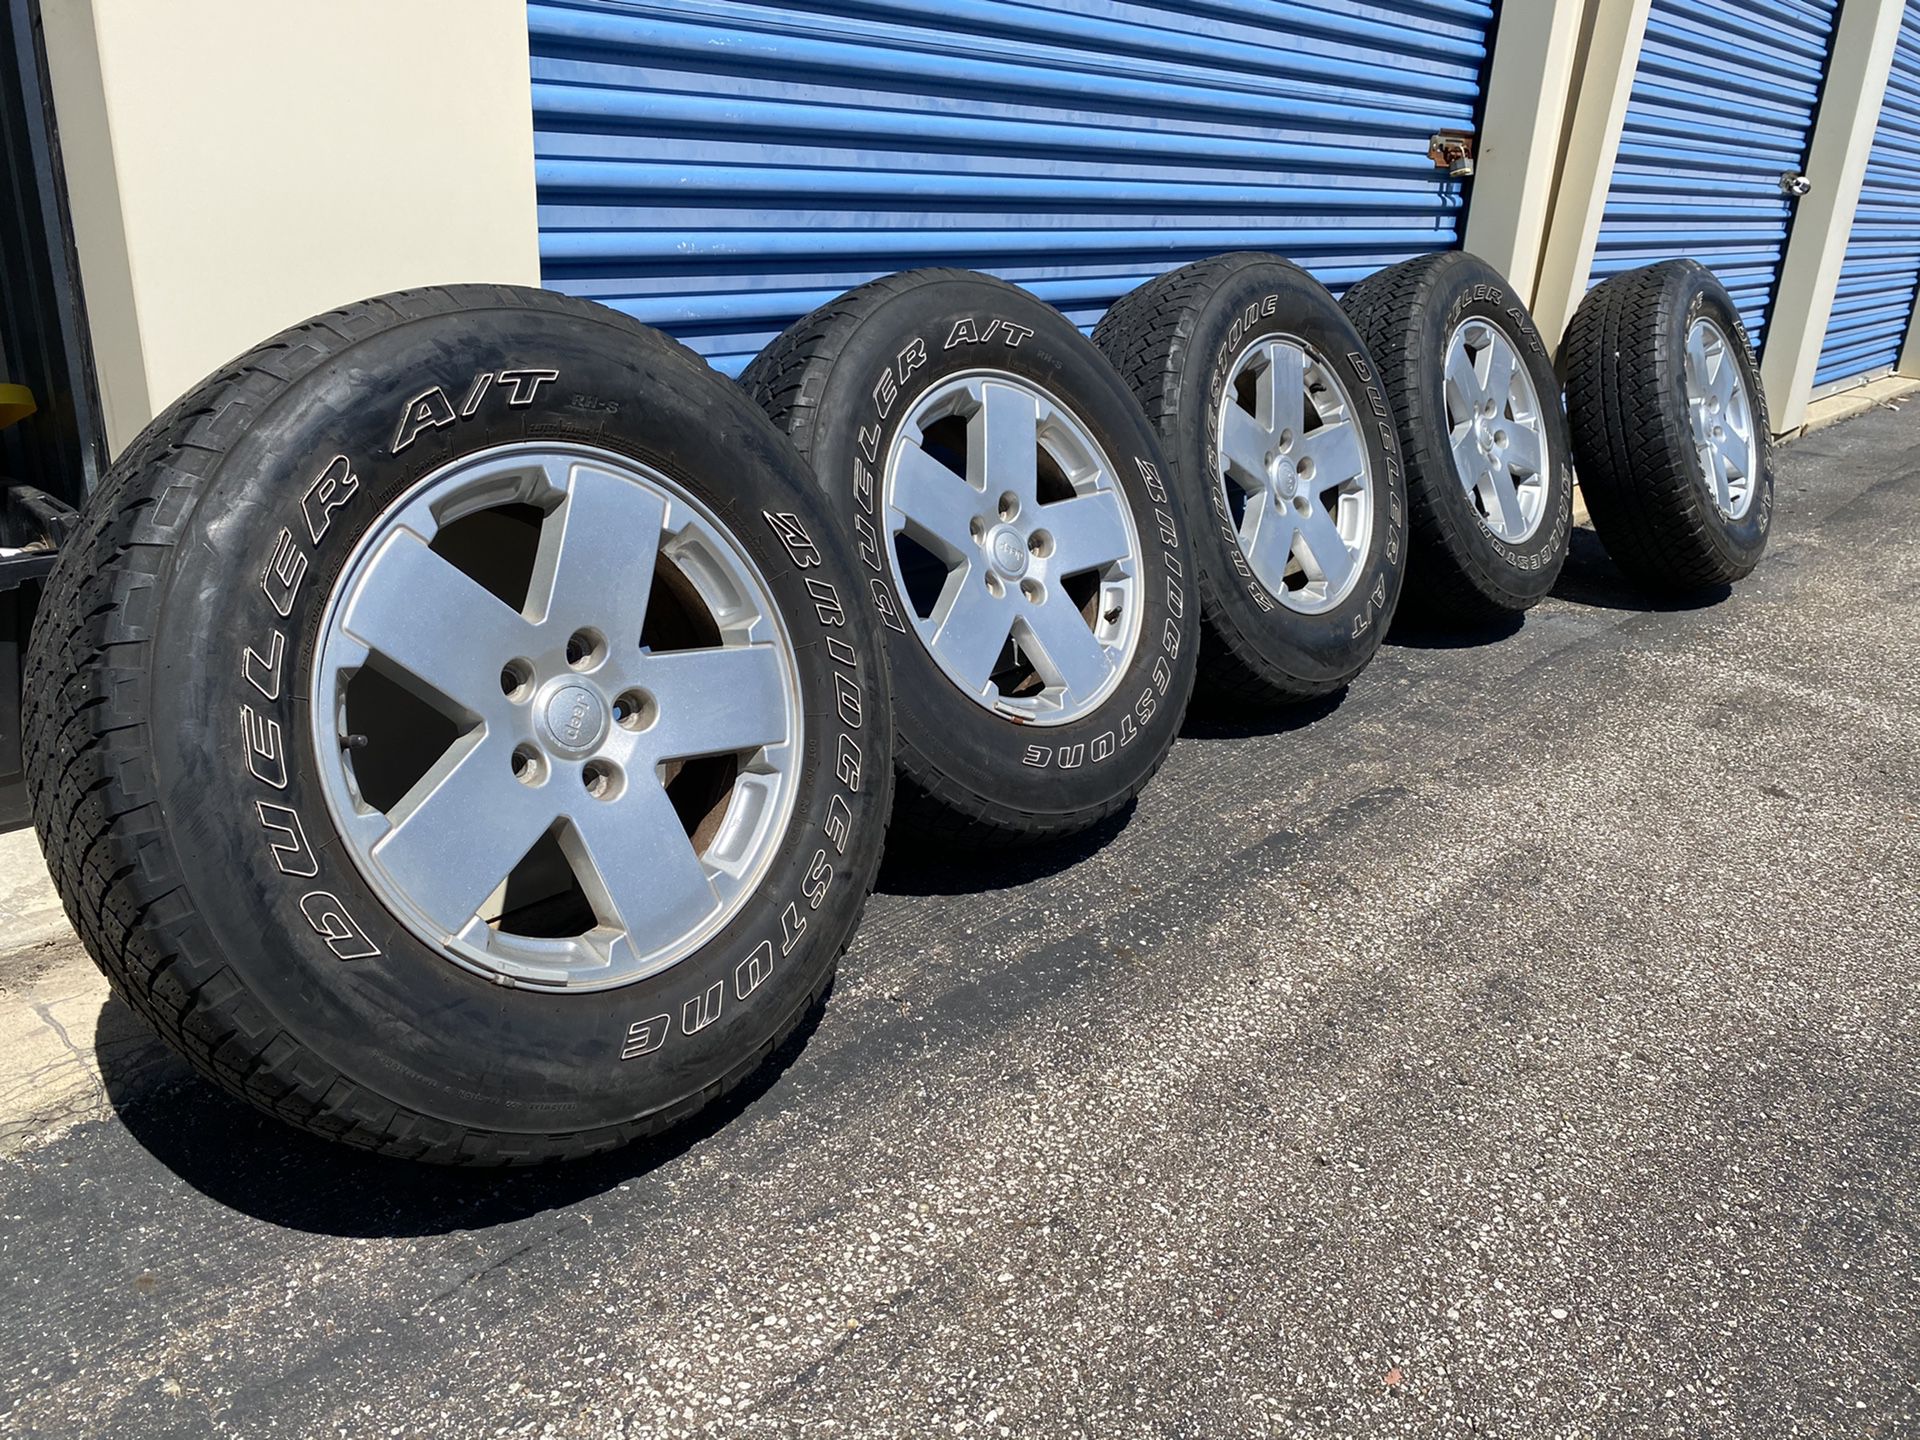 Jeep Wrangler Rims and Tires 18”